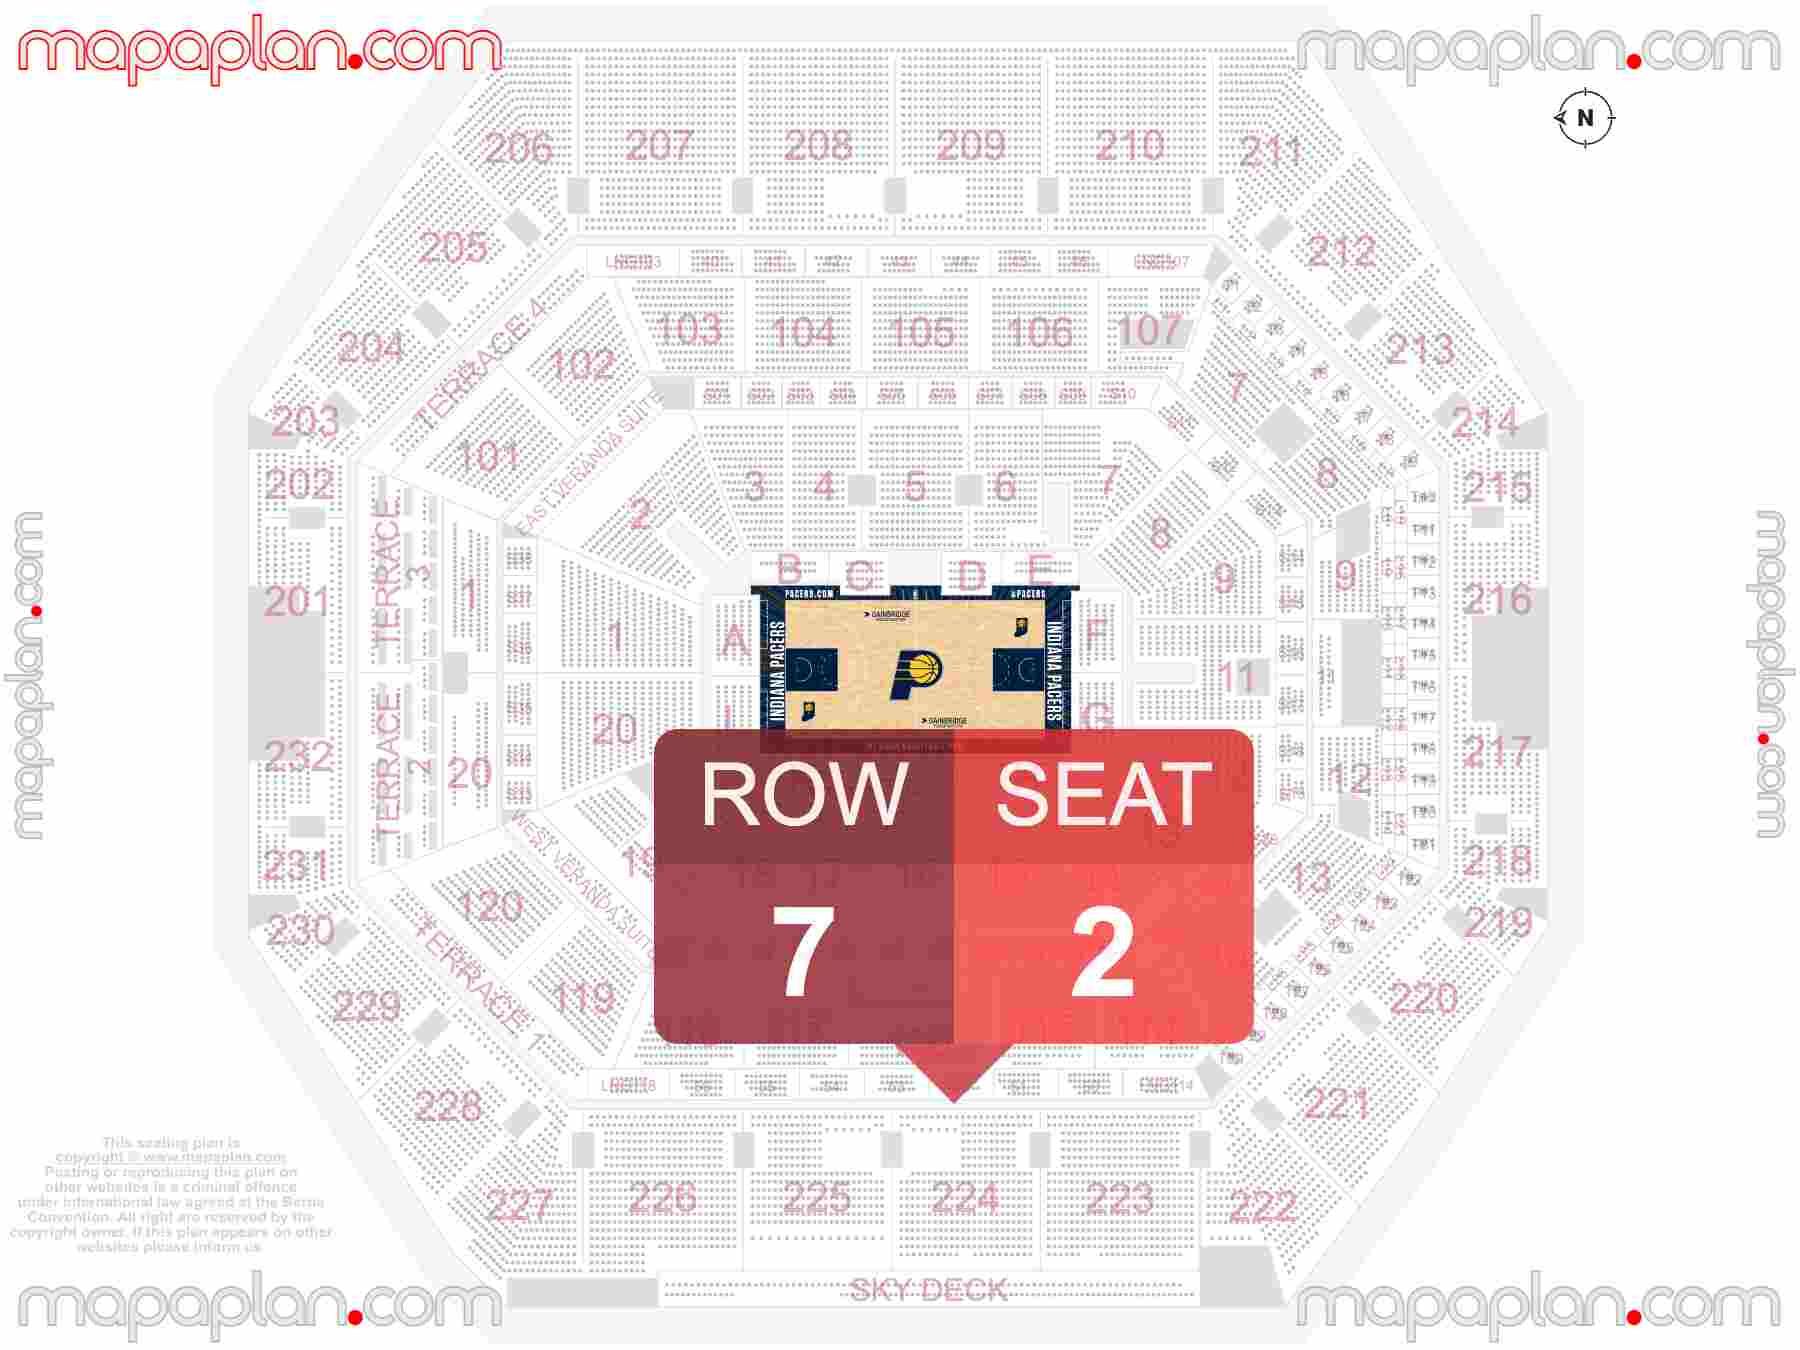 Indianapolis Gainbridge Fieldhouse seating chart Indiana Pacers NBA basketball inside capacity view arrangement plan - Interactive virtual 3d best seats & rows detailed stadium image configuration layout